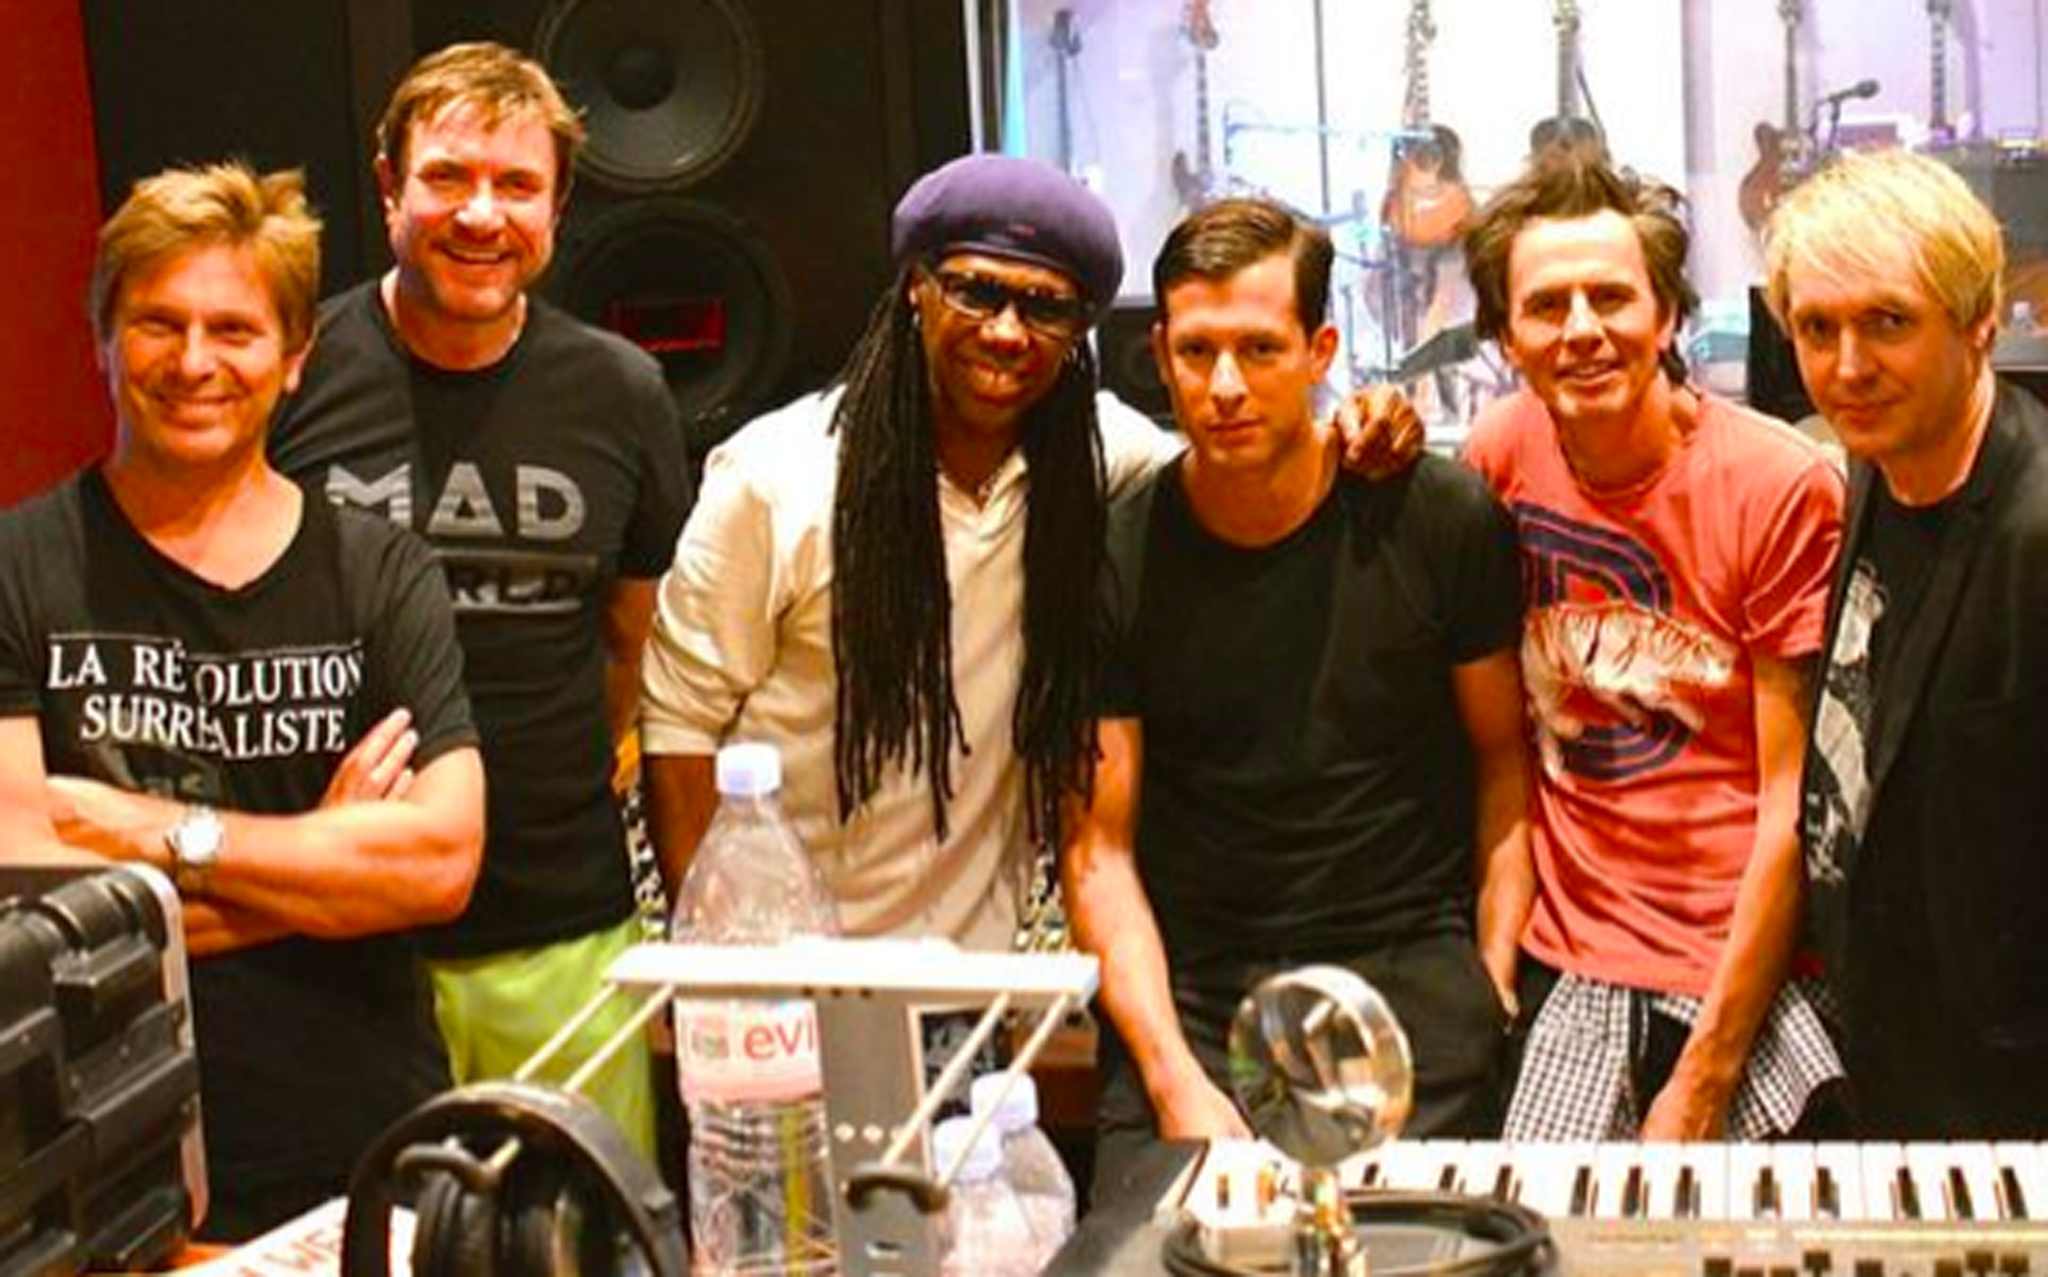 Duran Duran are collaborating with producers Nile Rodgers and Mark Ronson on their next album